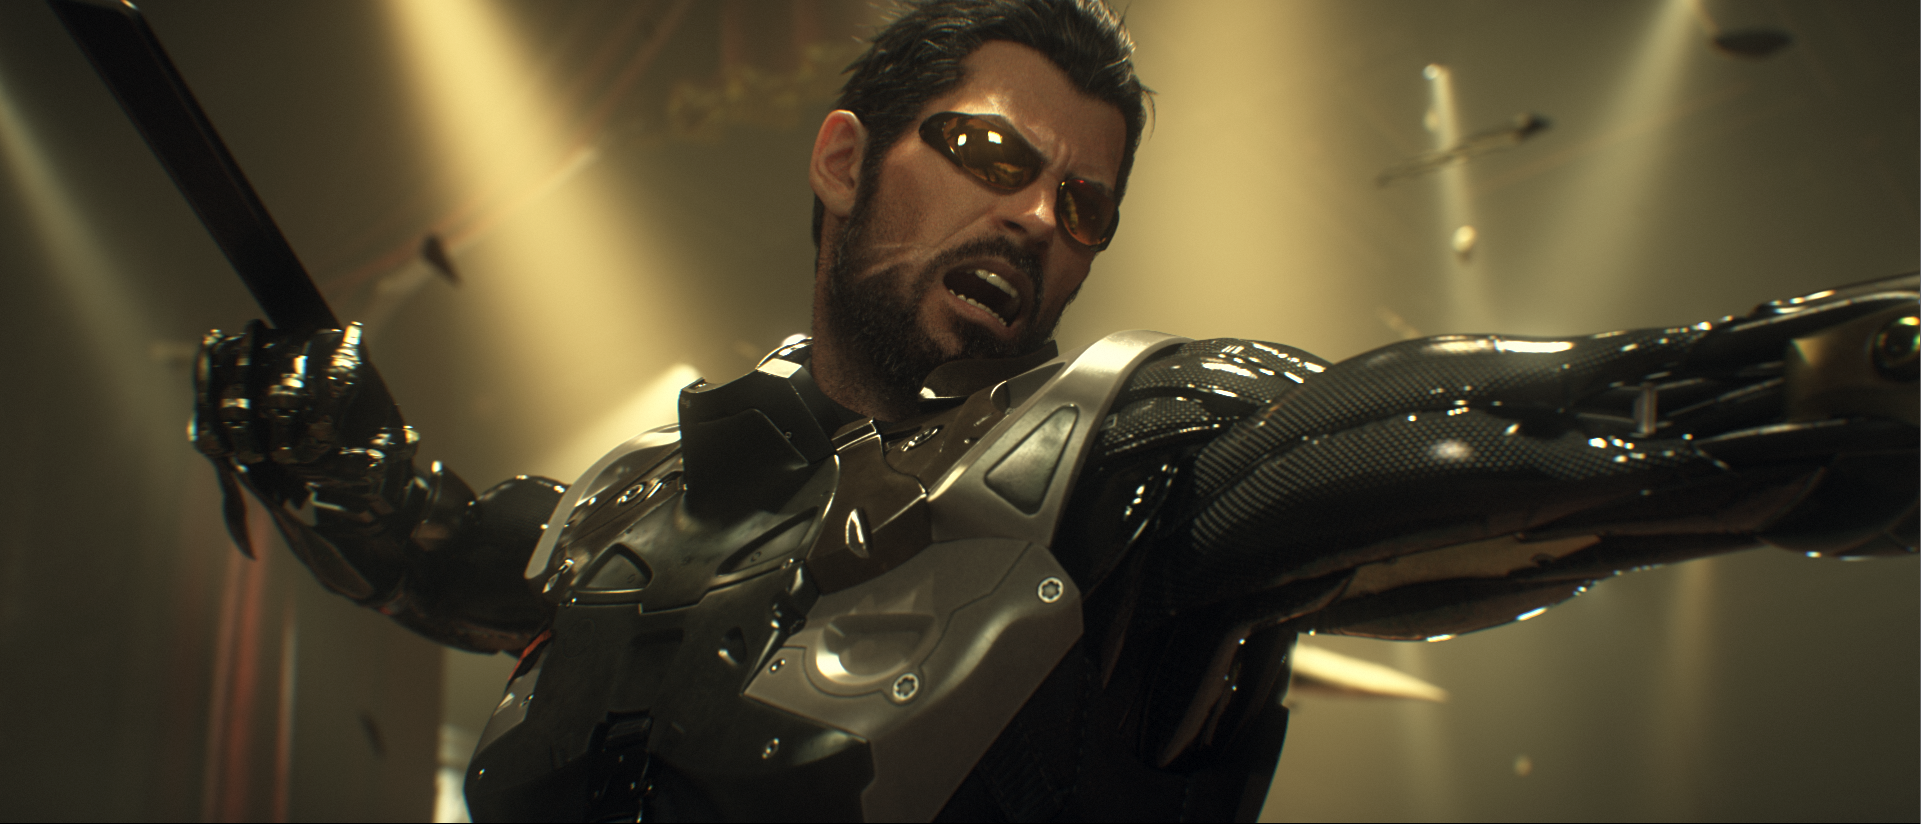 Deus Ex Mankind Divided Screenshot Showing the Main Character in a Punching Motion